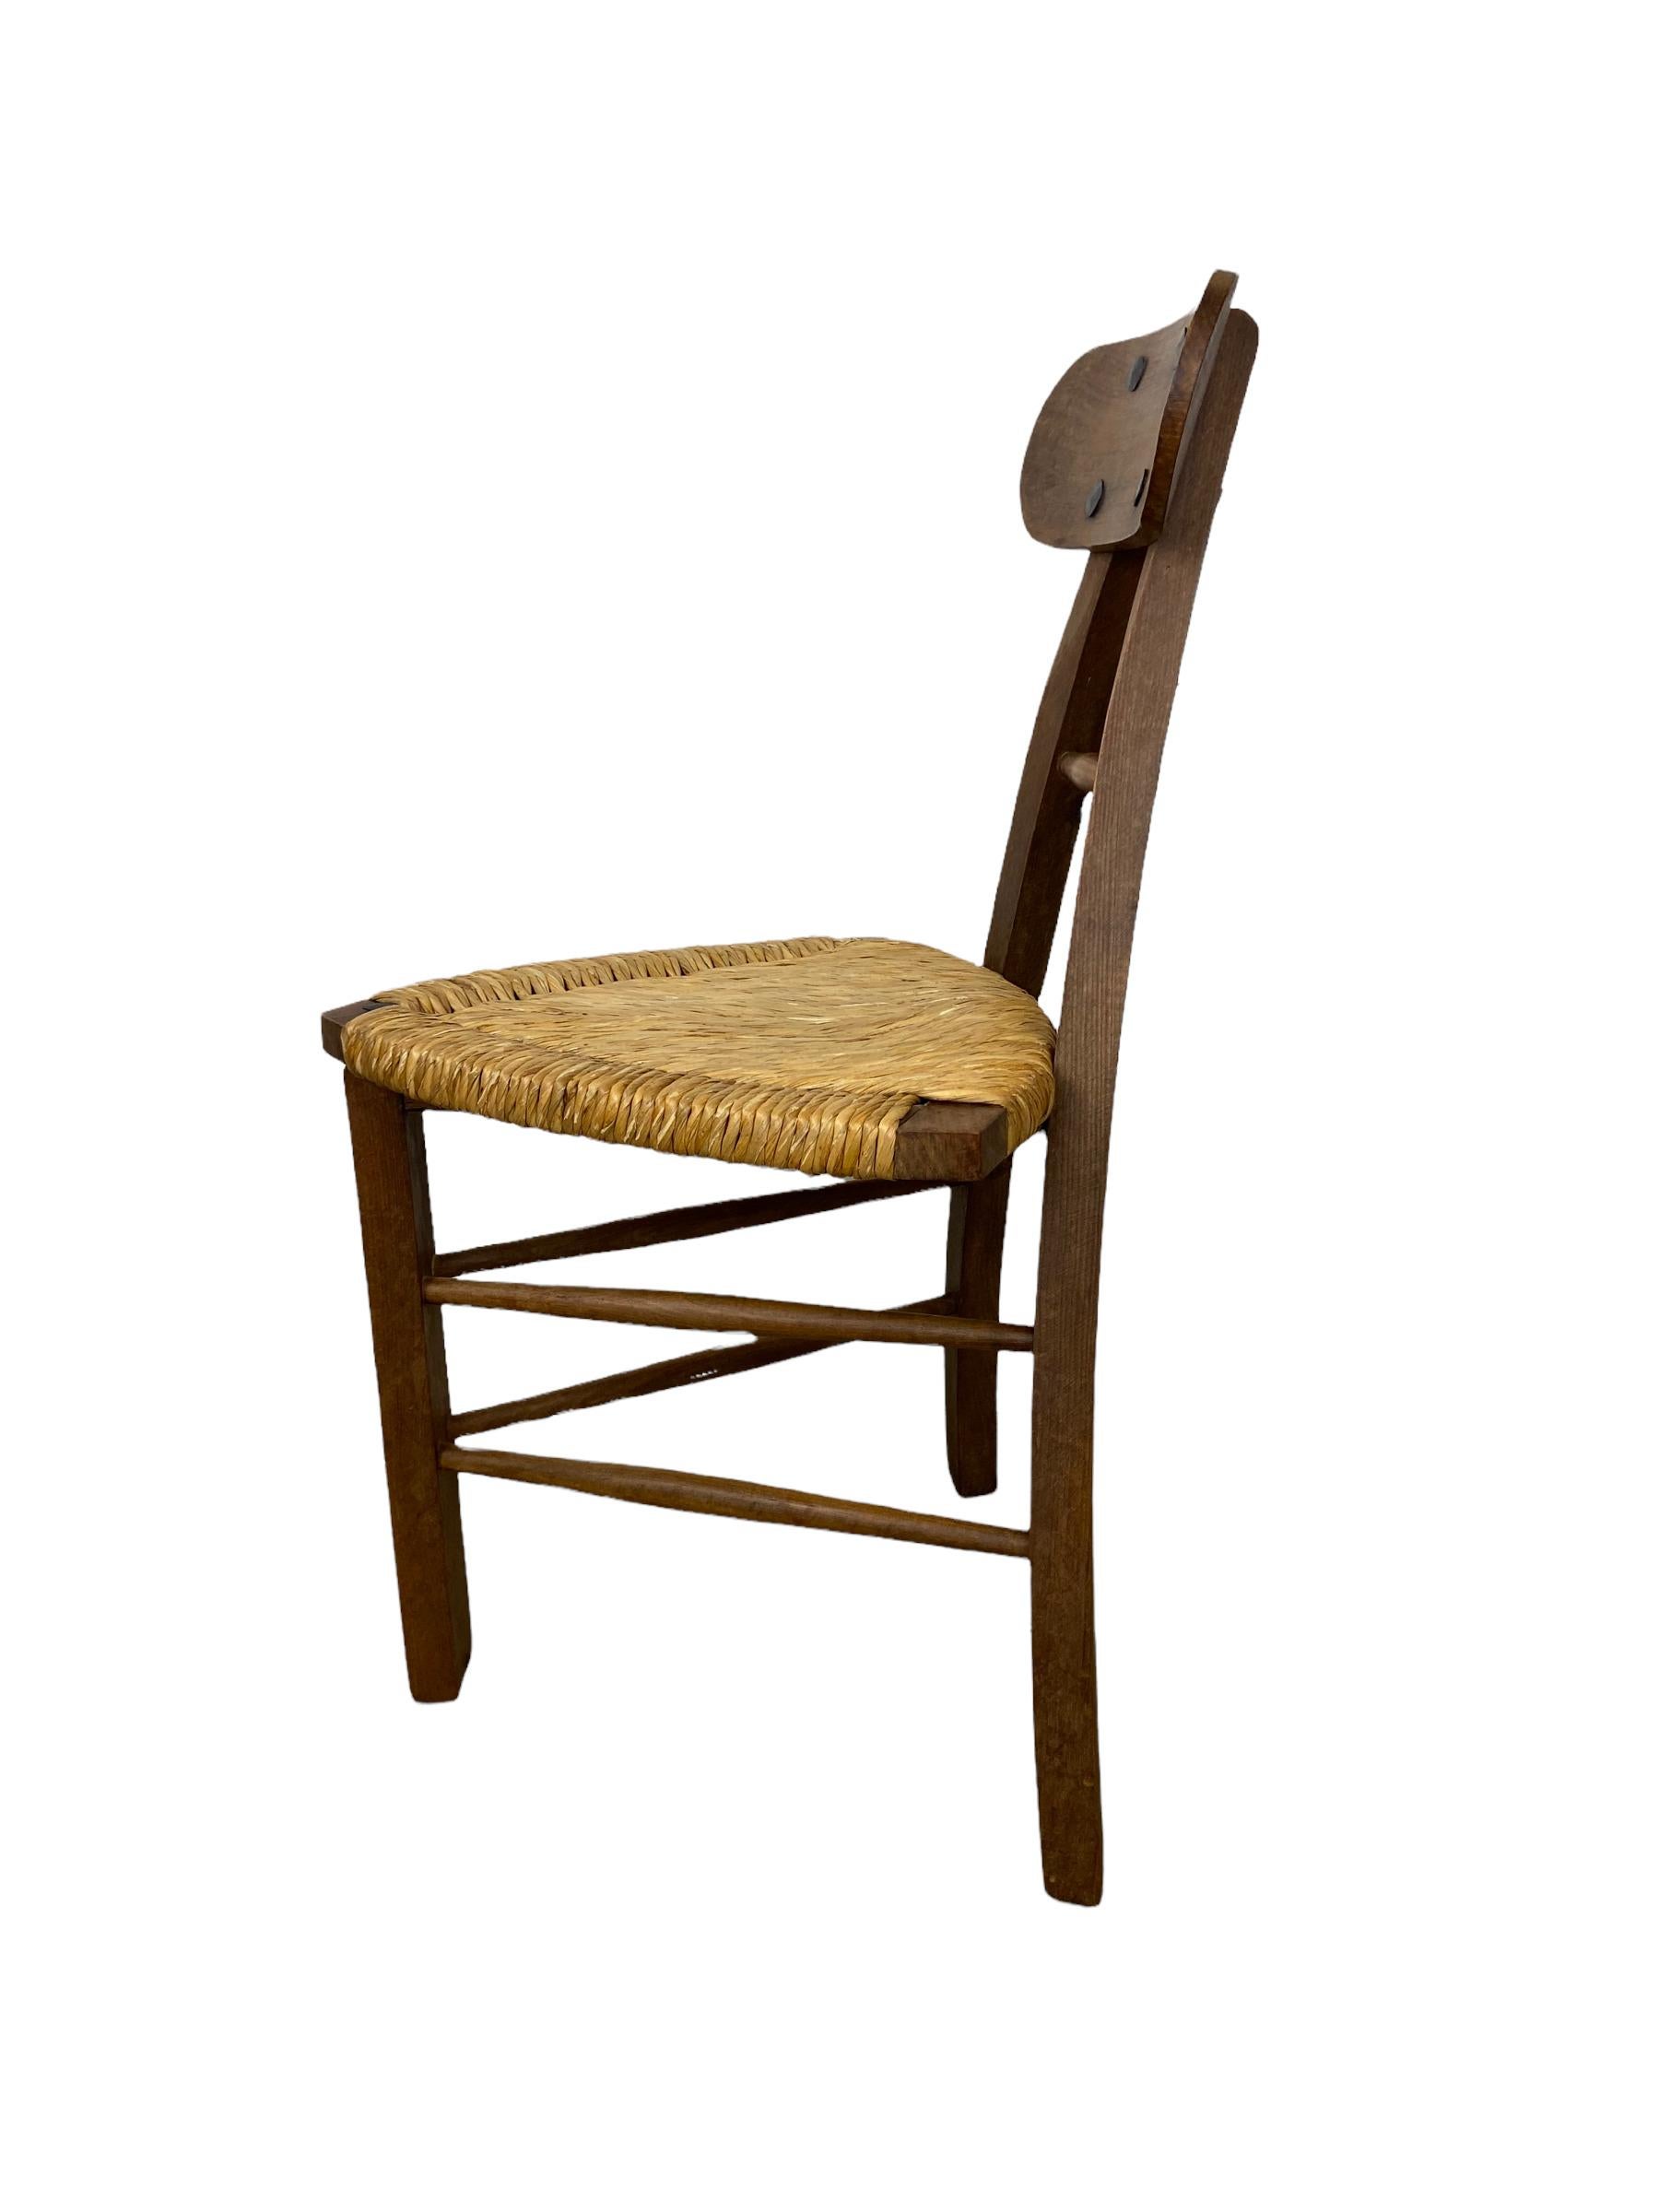 Mid-20th Century Tripod Chair French Fifties Design For Sale